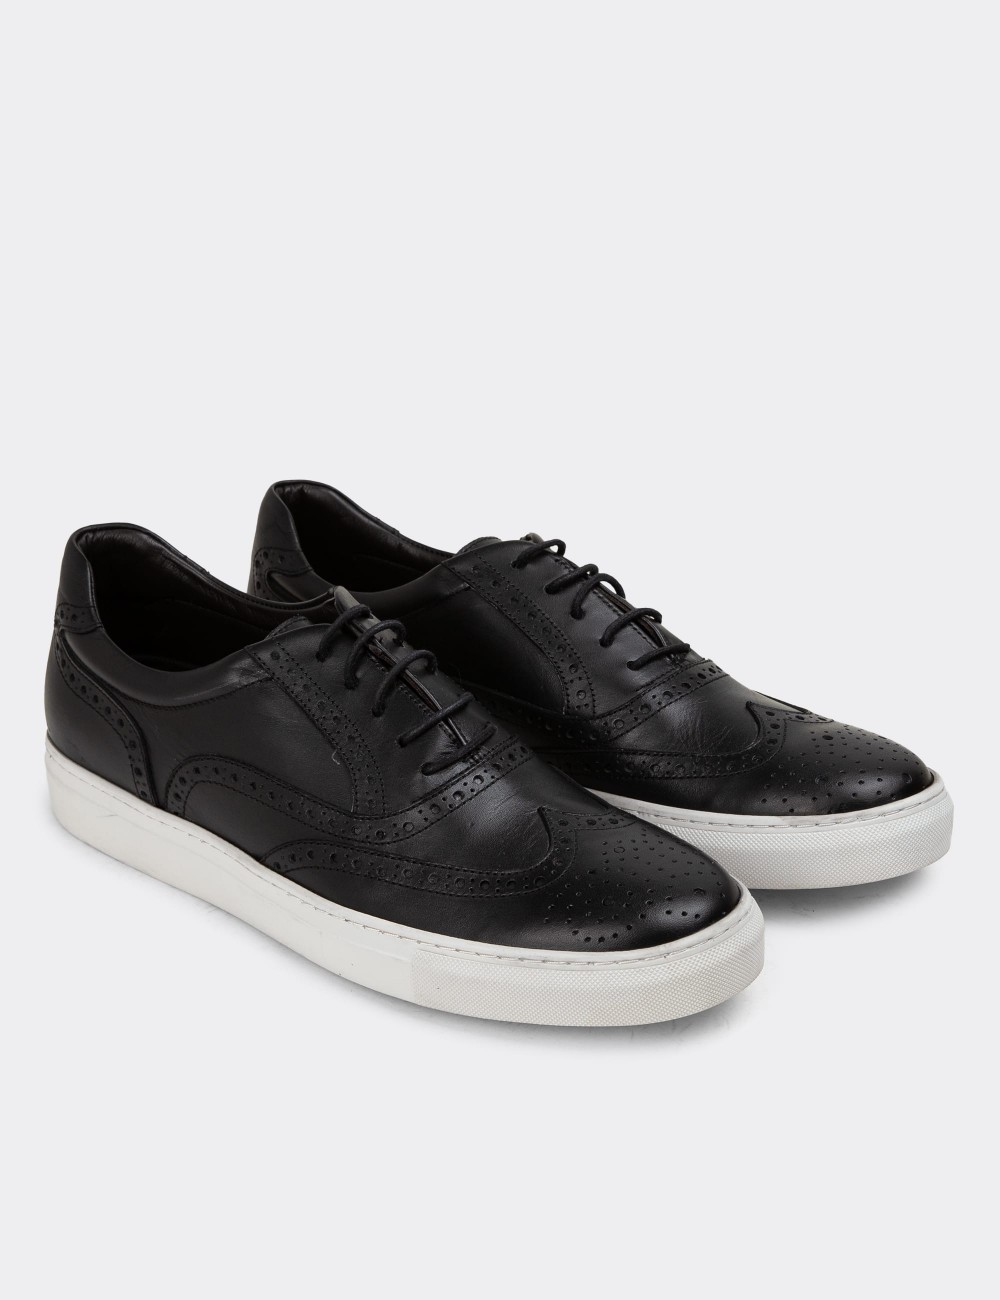 Black Leather Sneakers - 01637MSYHC08